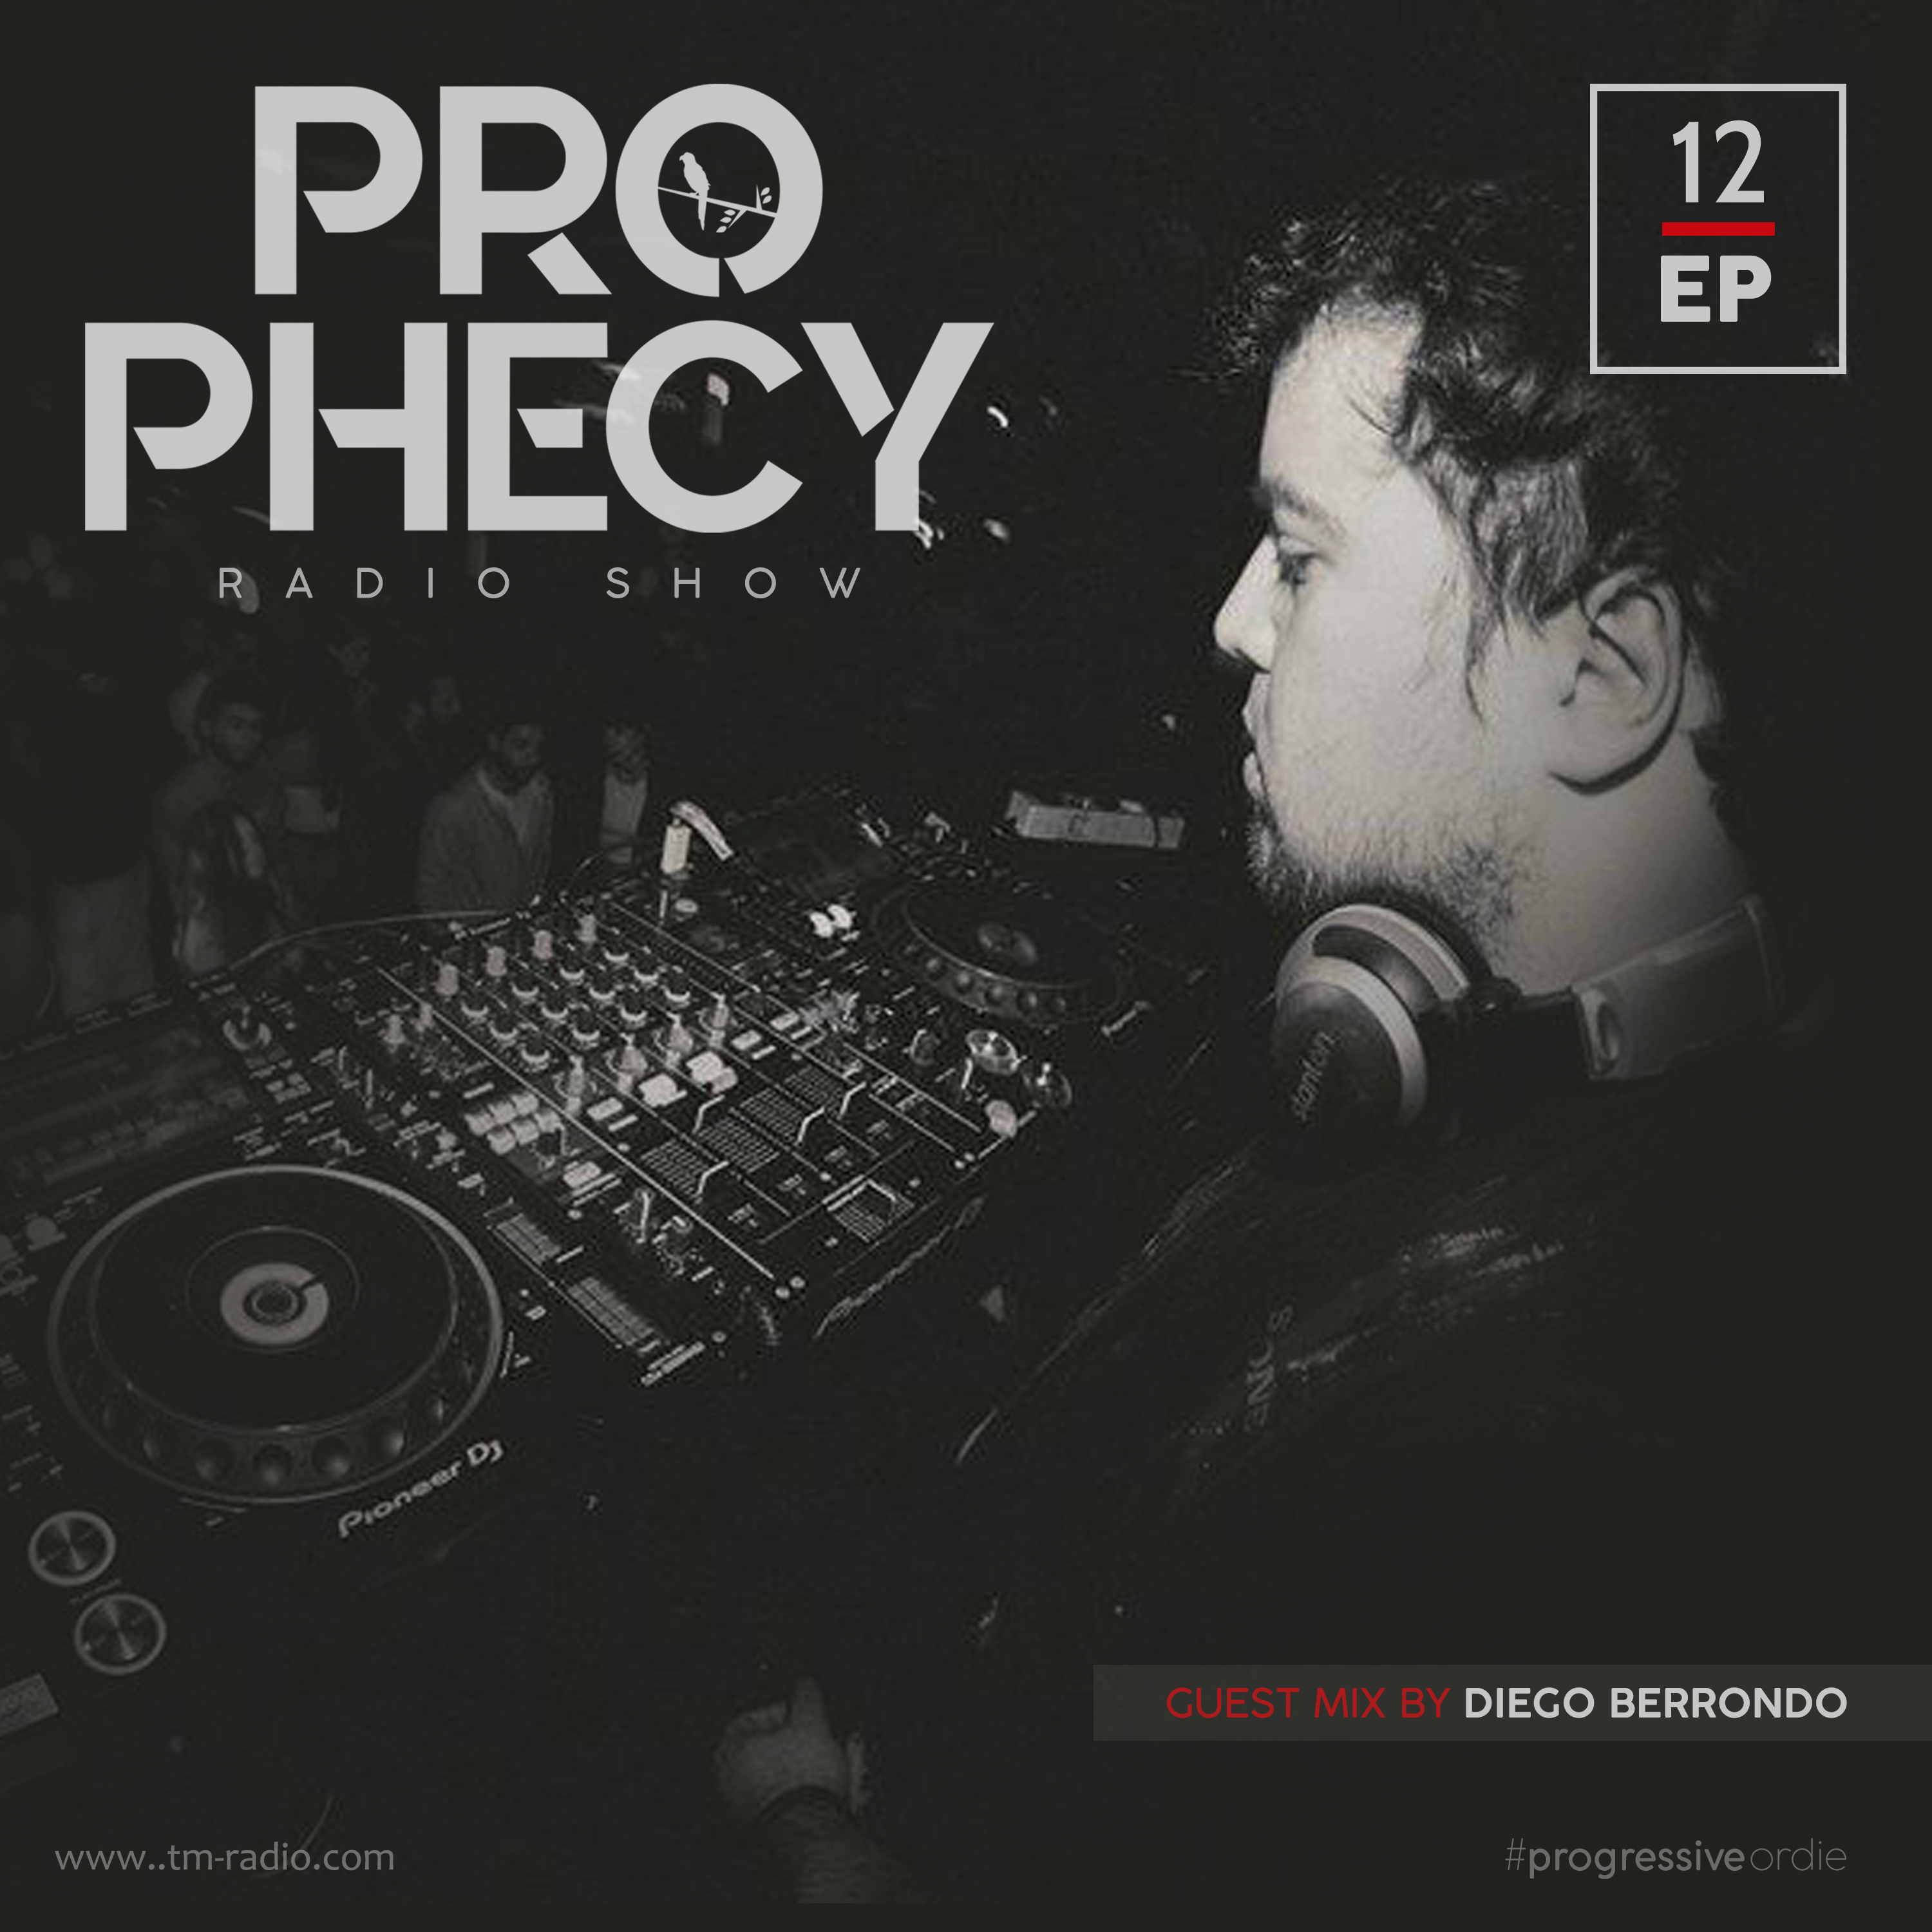 PROPHECY :: Praveen & Diego - Prophecy Radio Show @ TM Radio (USA) 15.11.2019 (aired on November 15th, 2019) banner logo